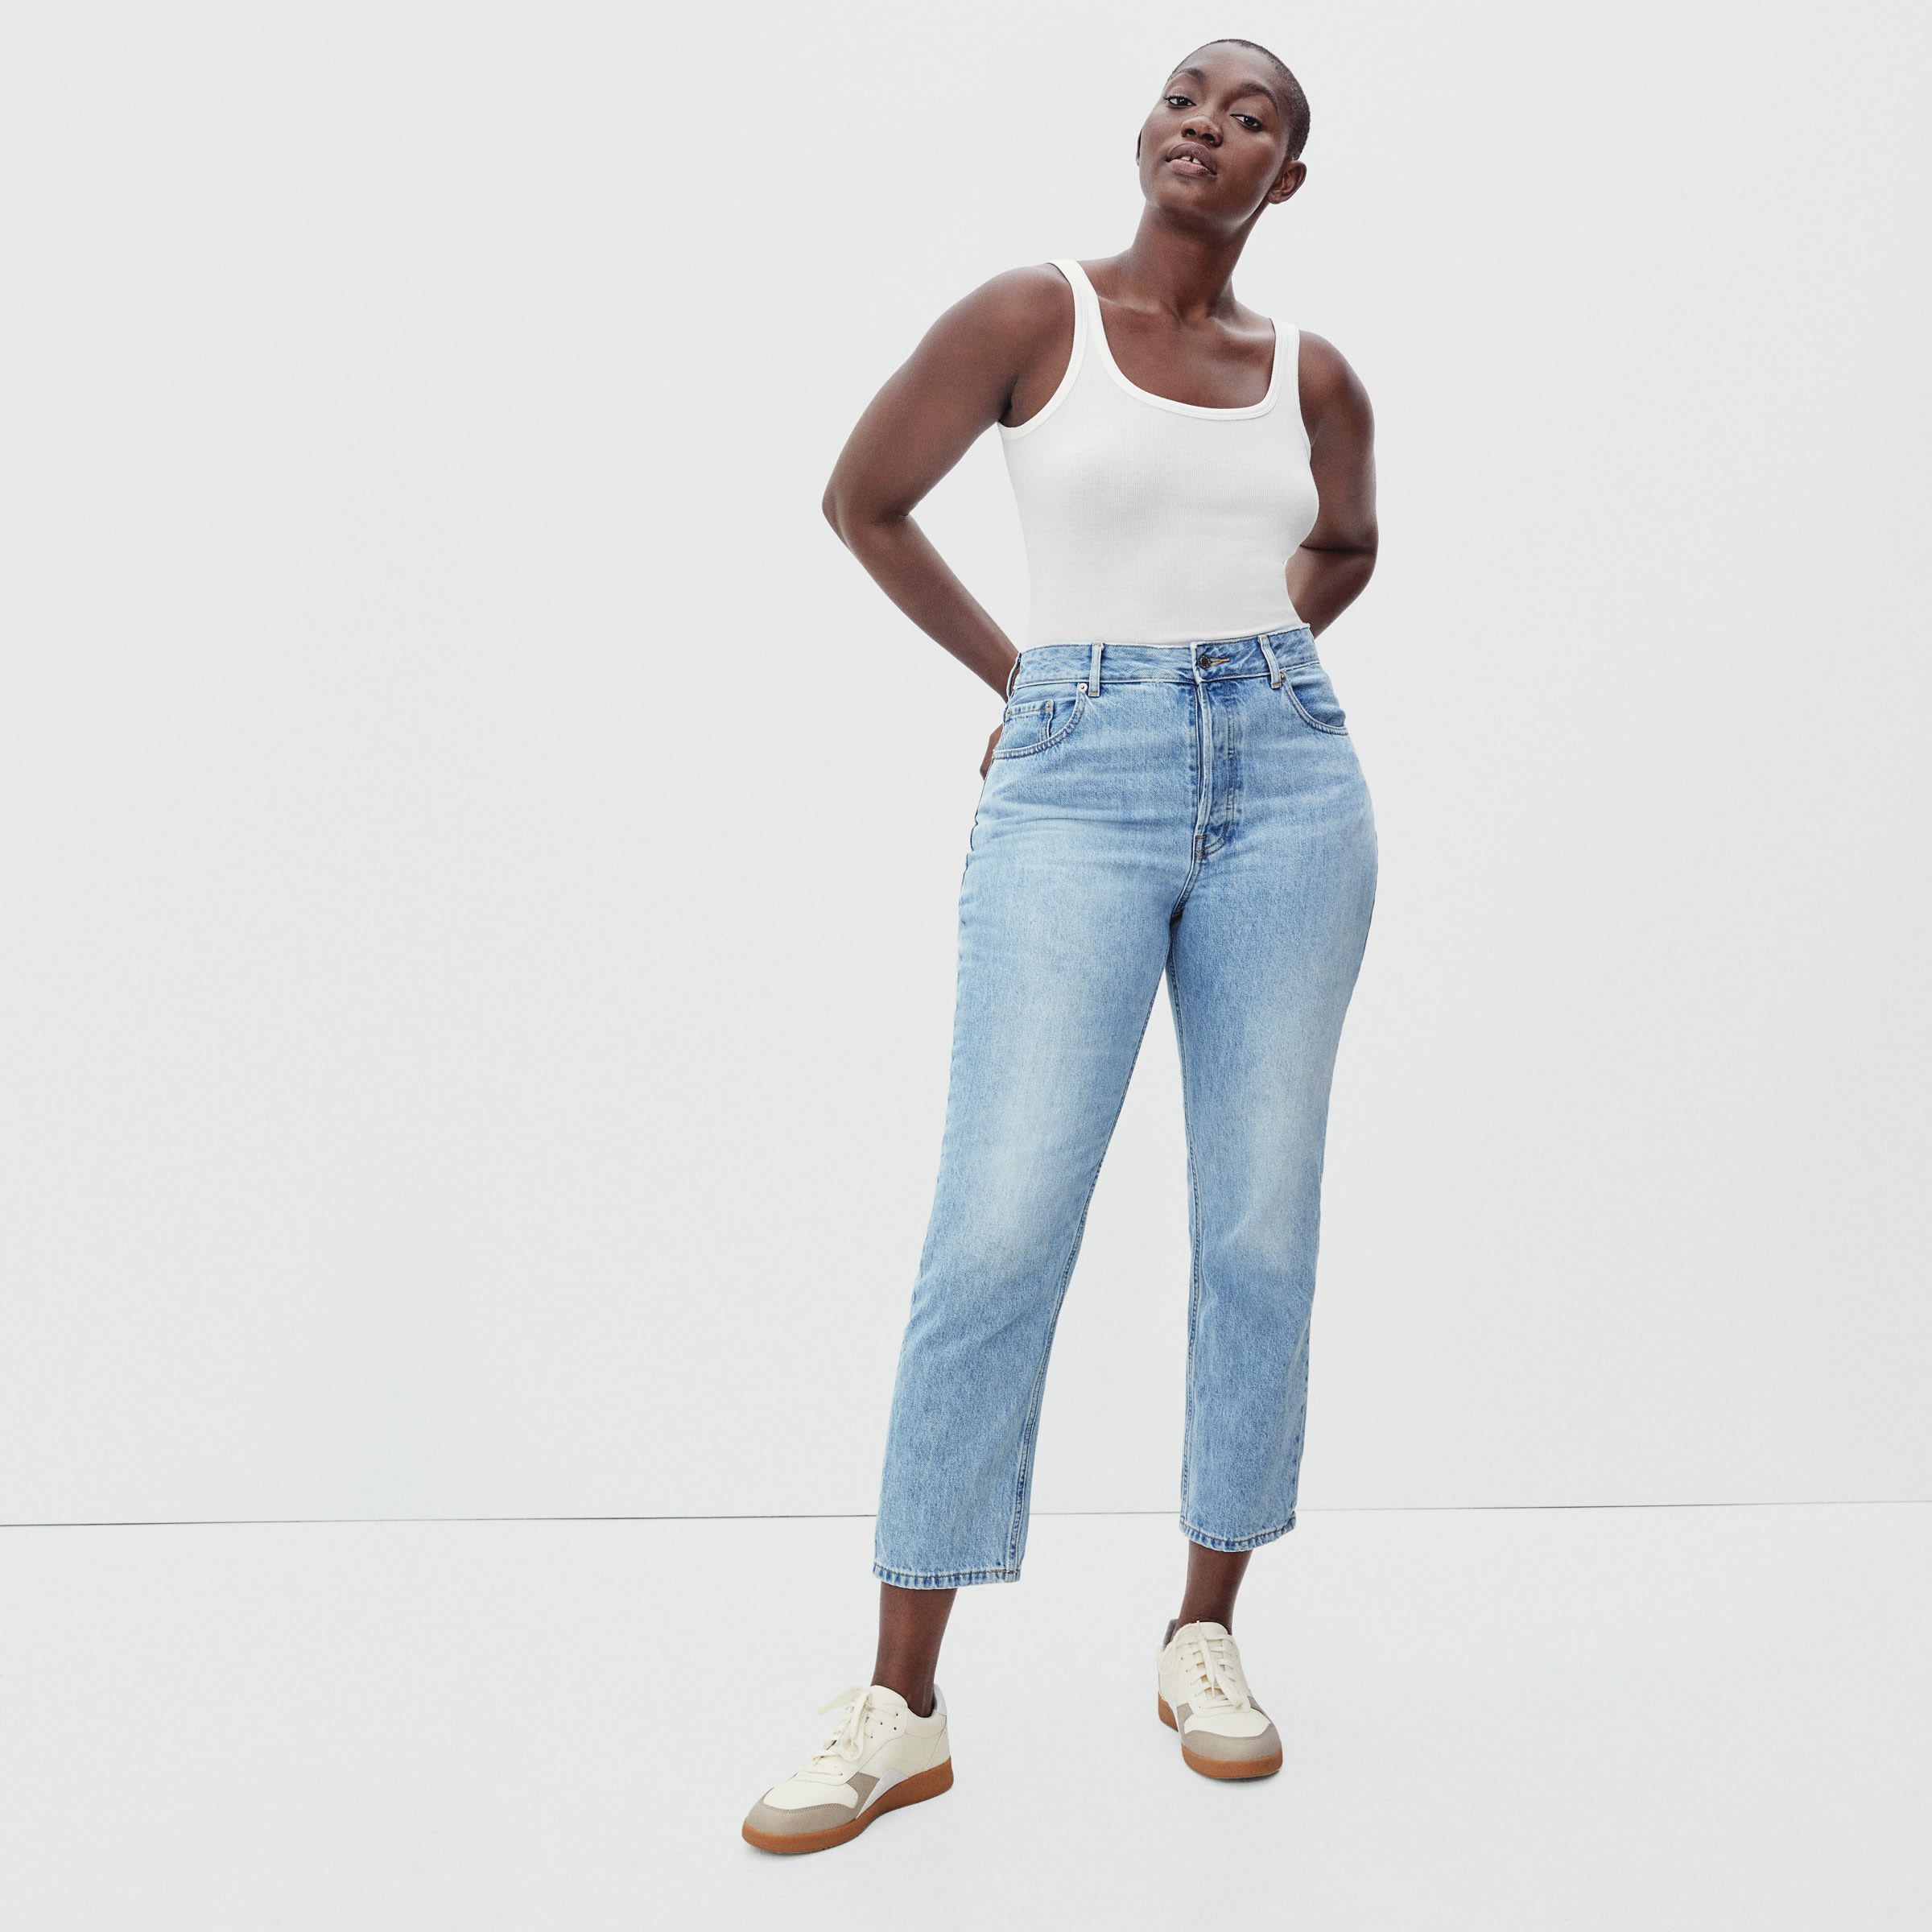 The 7 Best Curvy Jeans for Curvy Bodies